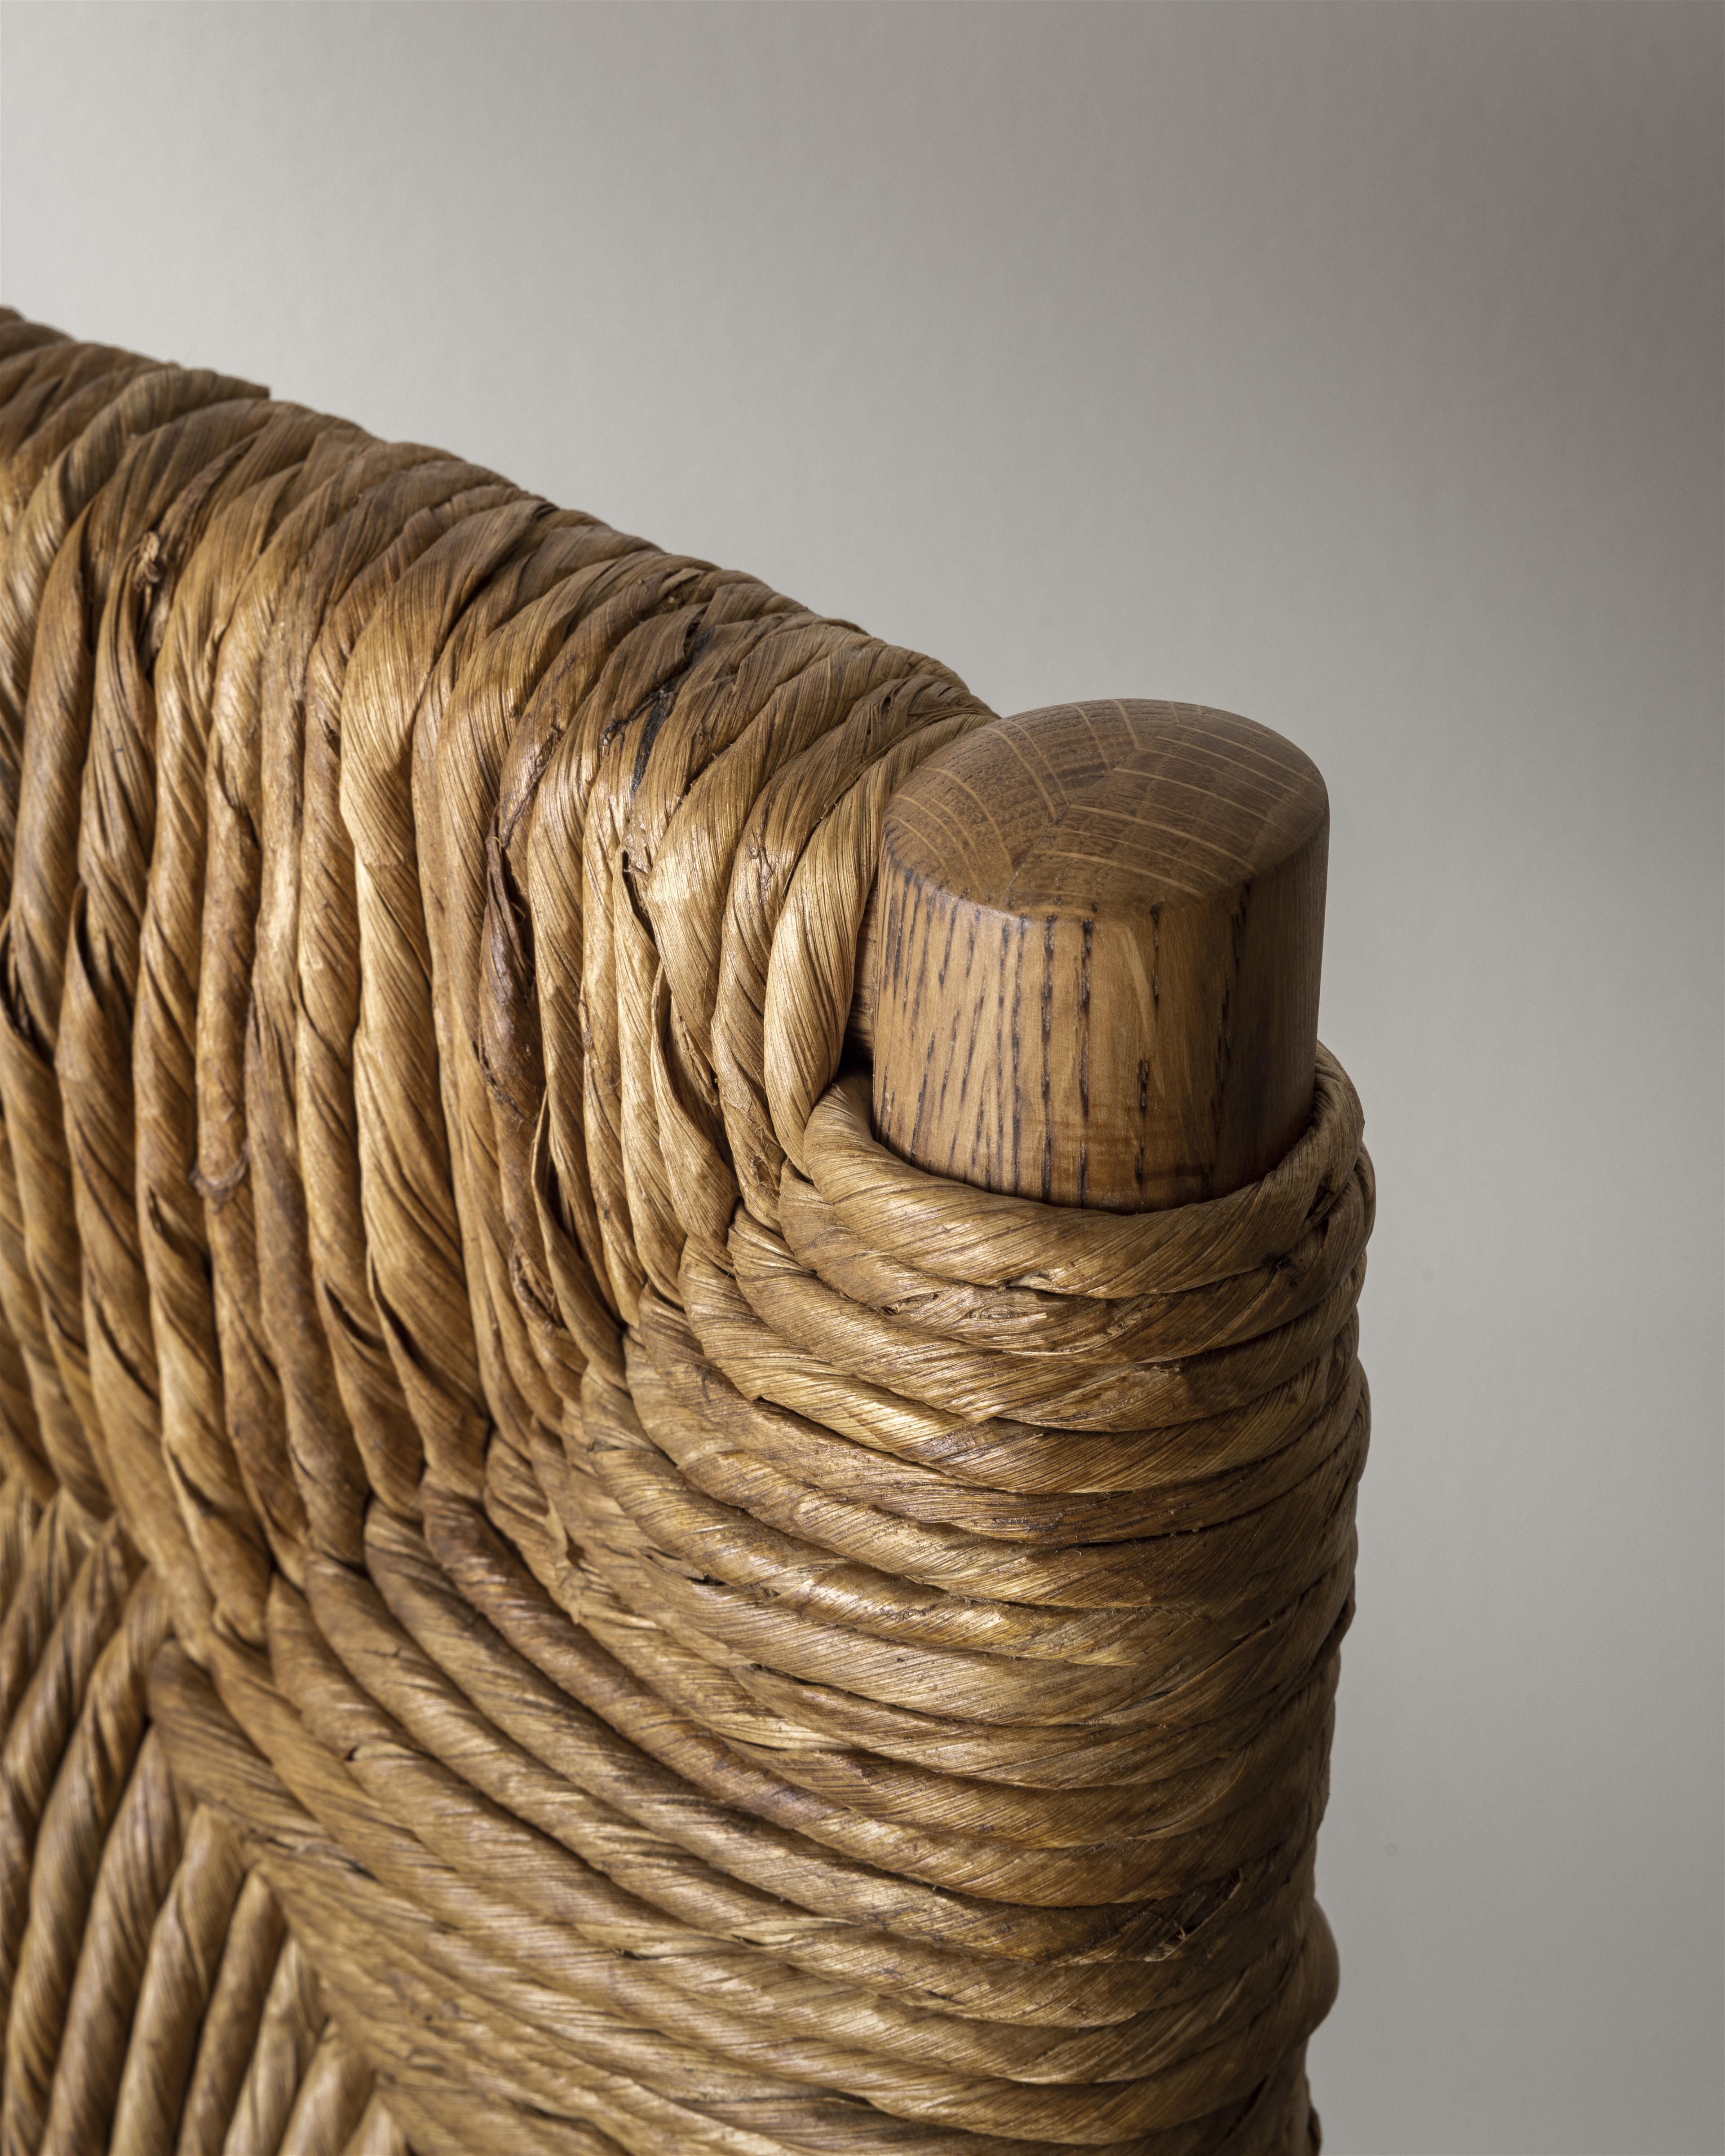 a close up of a wooden bench made of rope